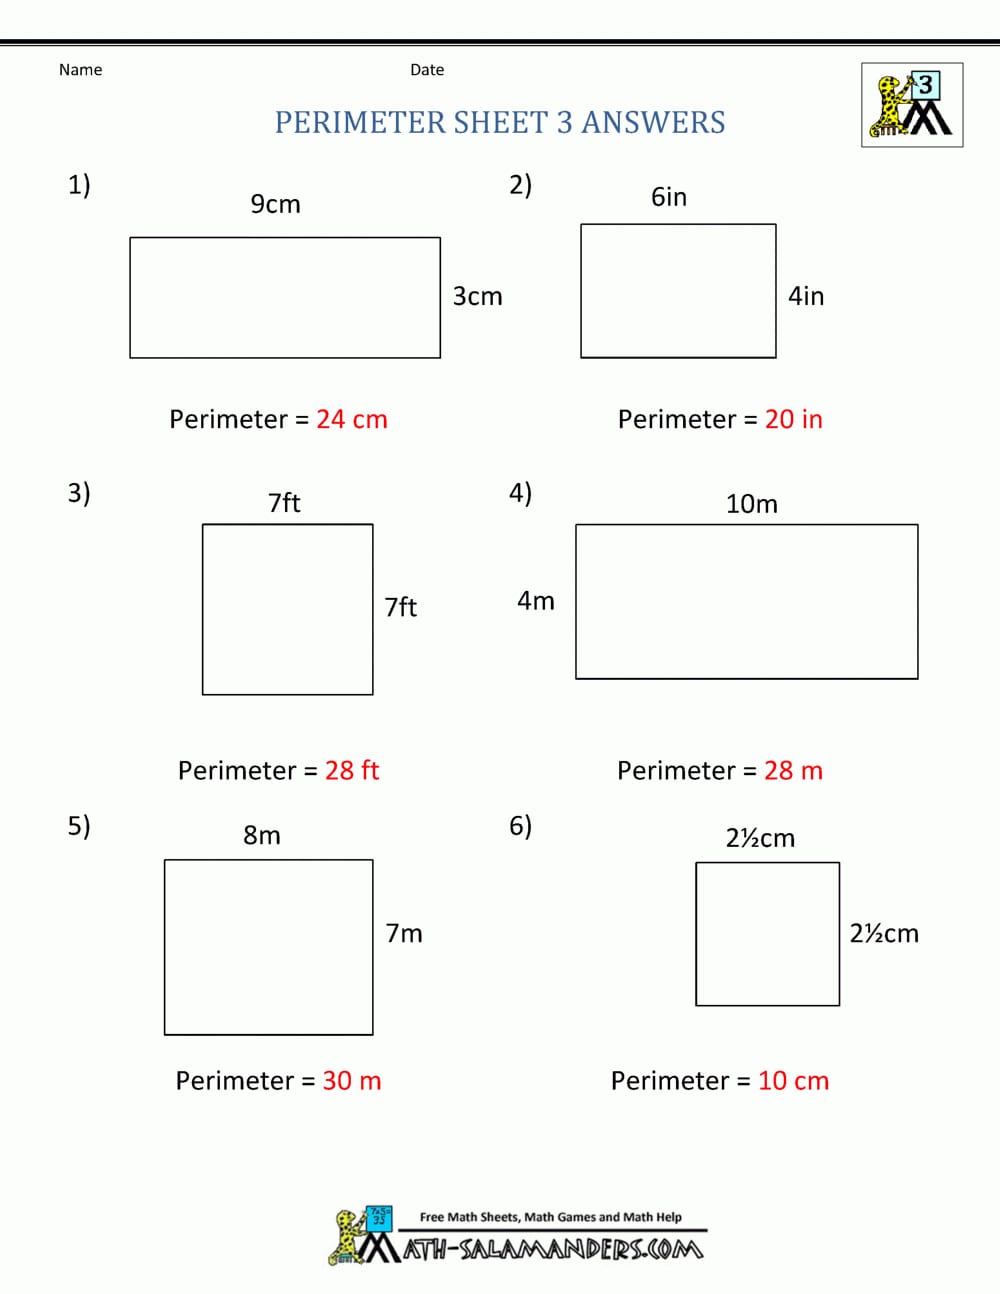 Perimeter Worksheets Together With High School Geometry Worksheets Pdf